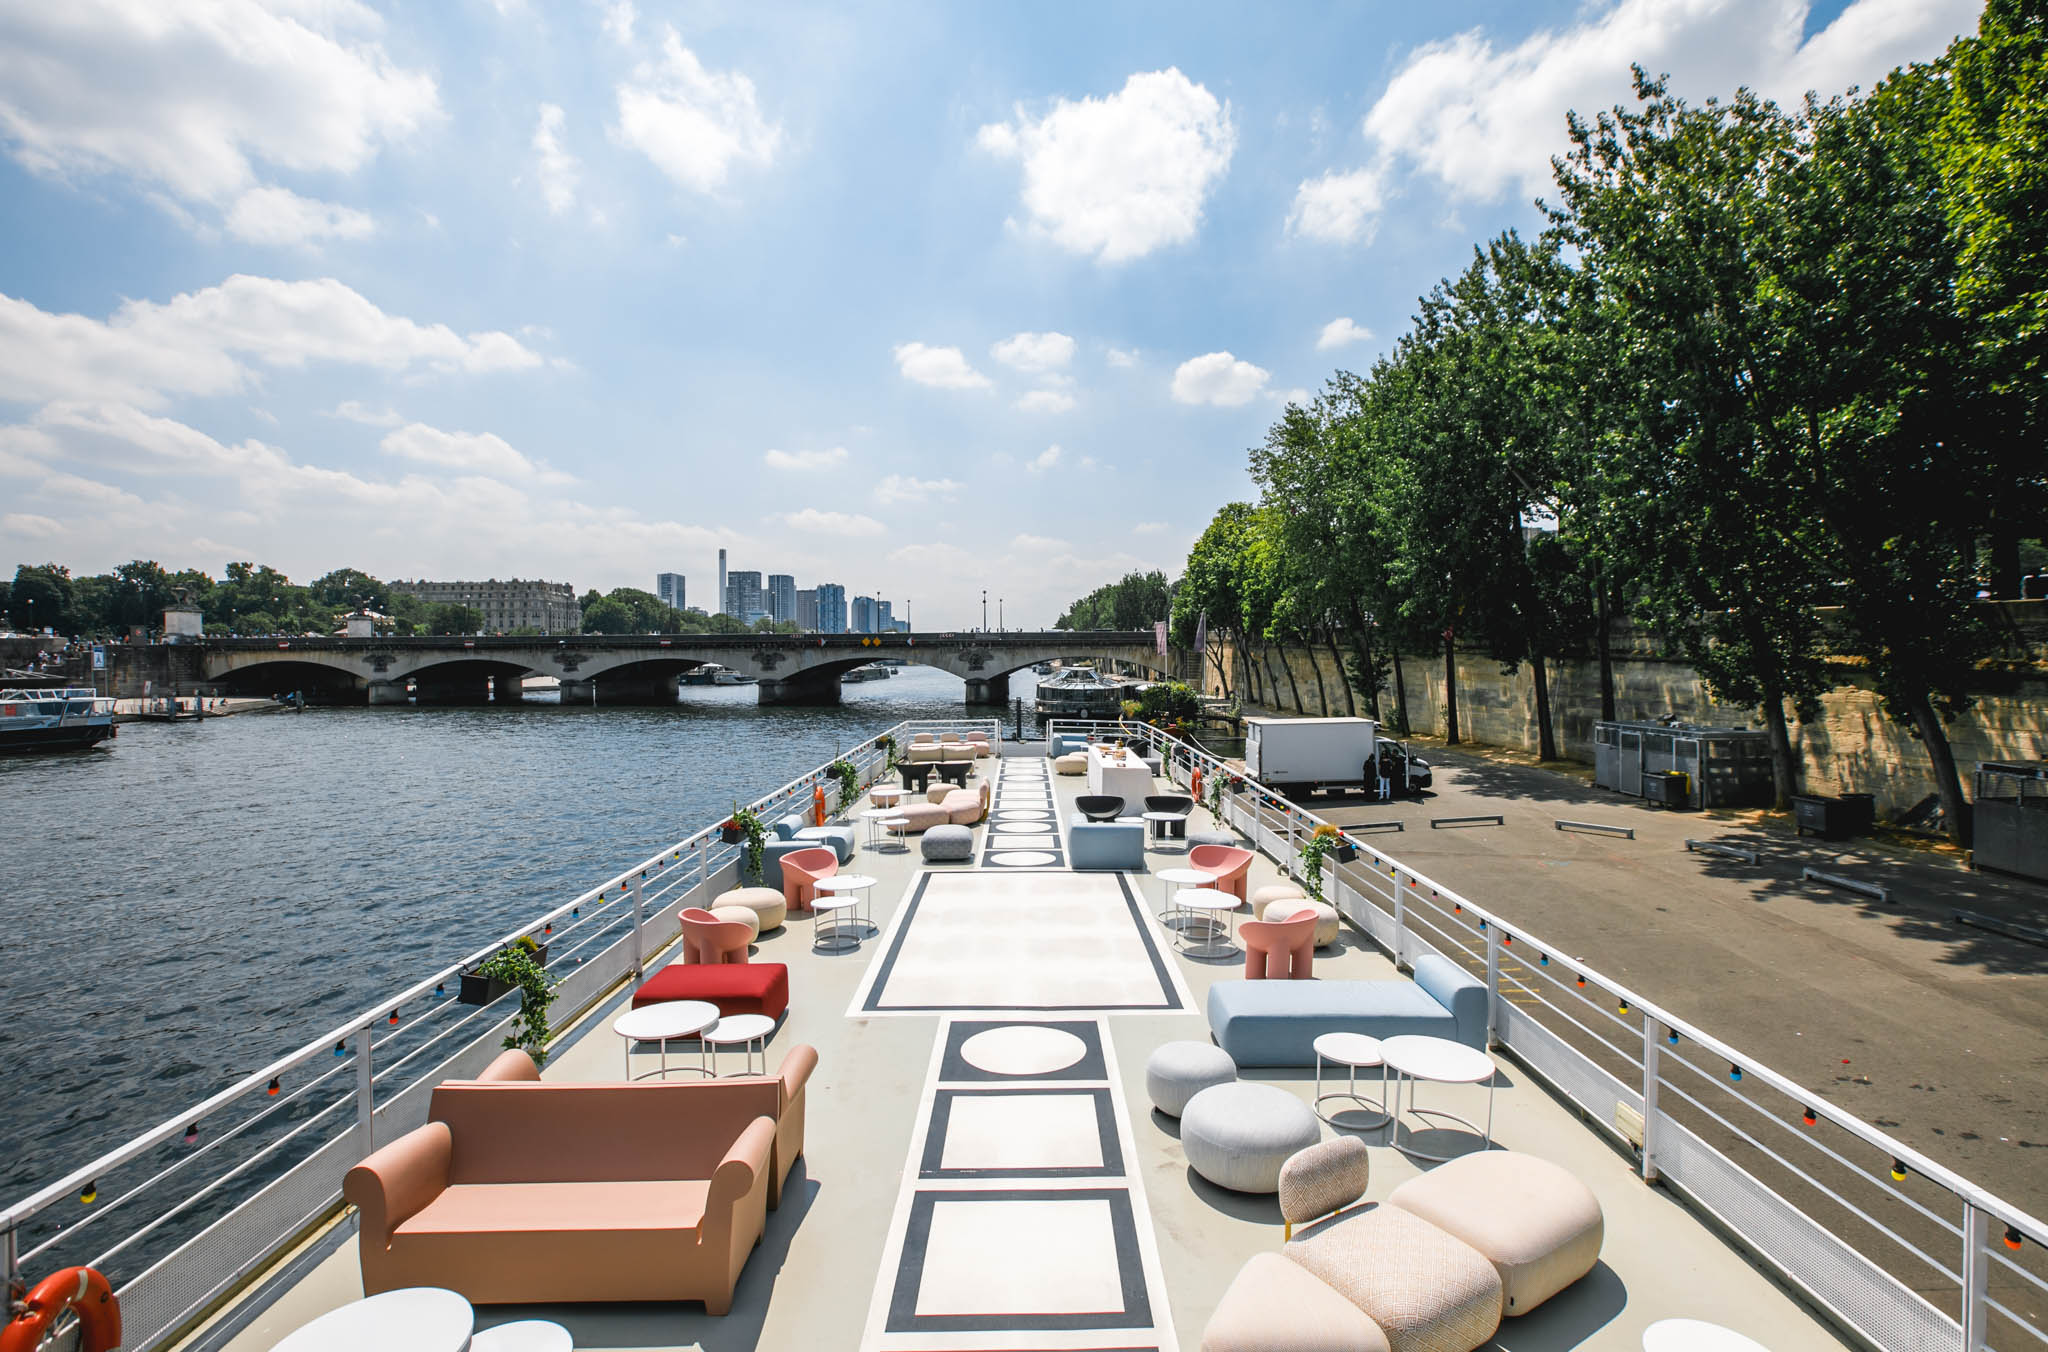 Settle down on the biggest Parisian roof-top for the time of an event.